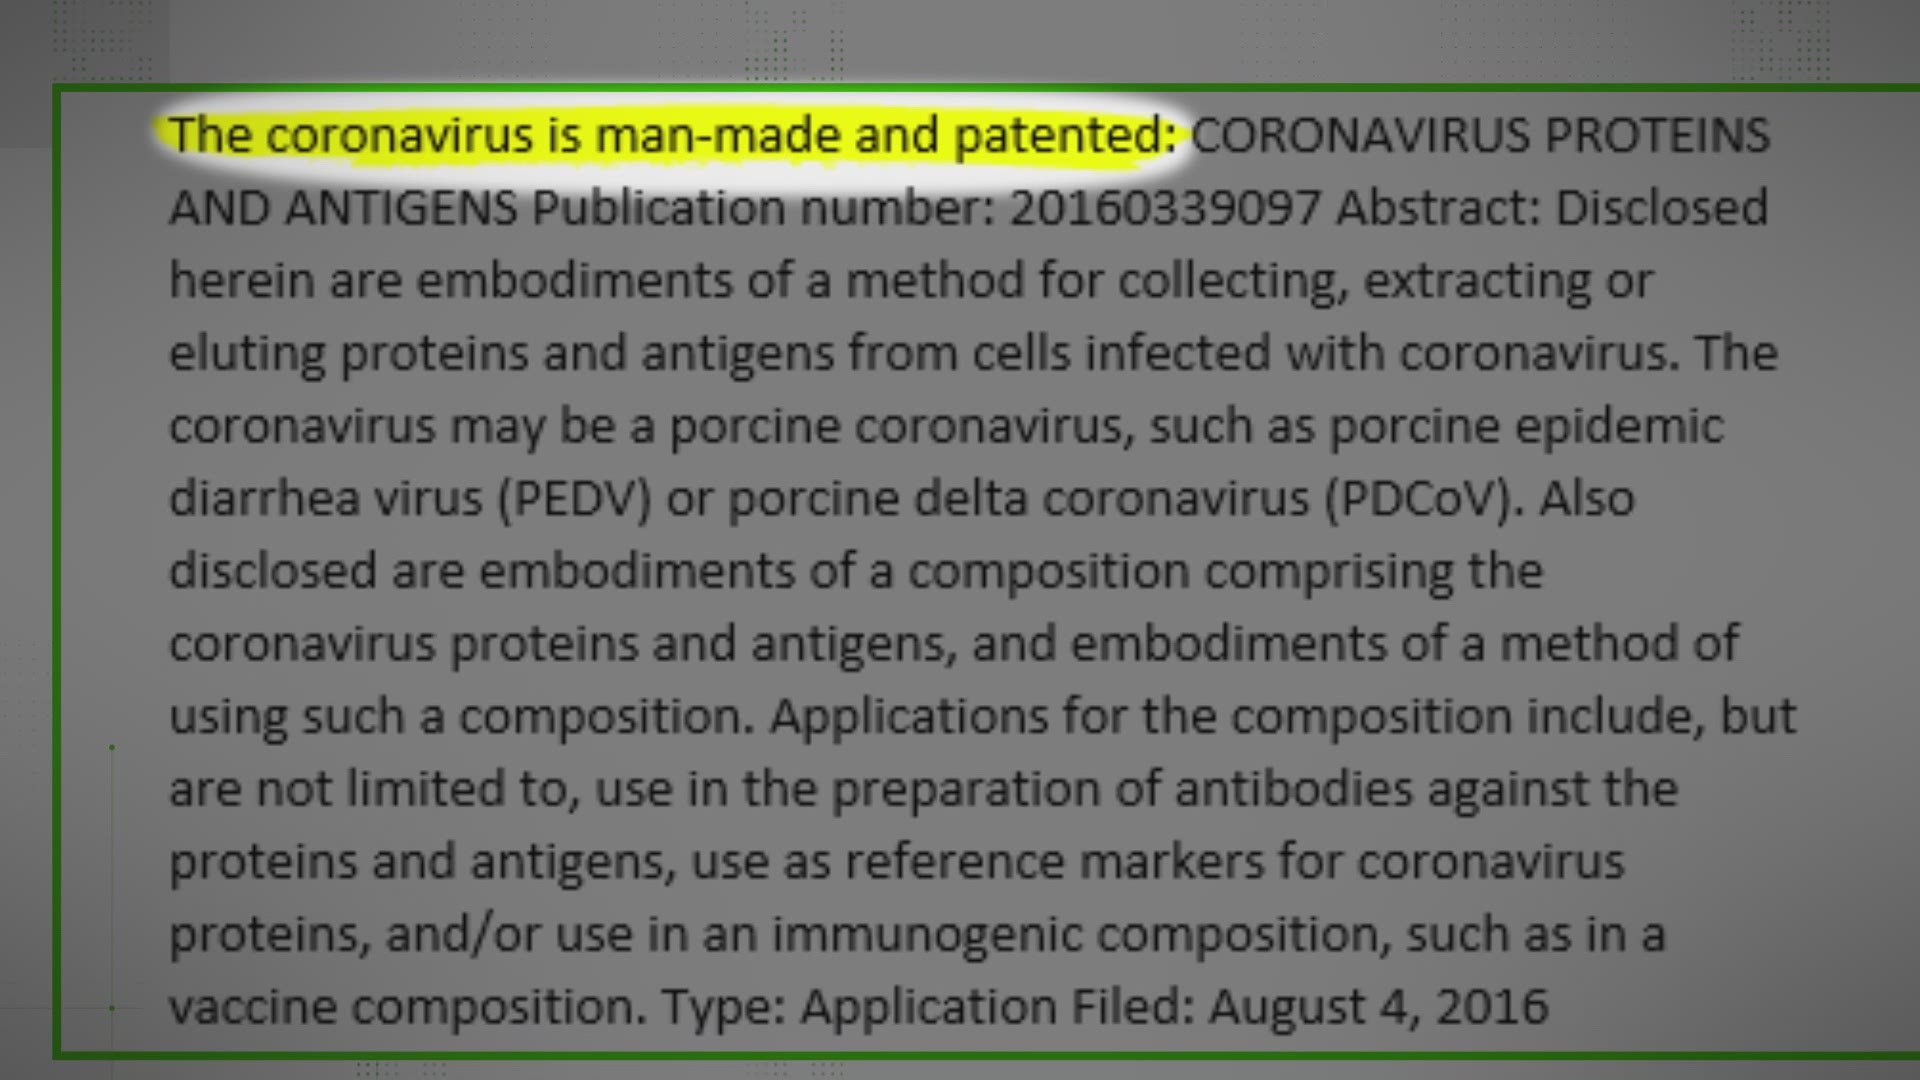 A bit of confusion around the names of certain coronaviruses has led to larger claims that governments have known about this virus for years.